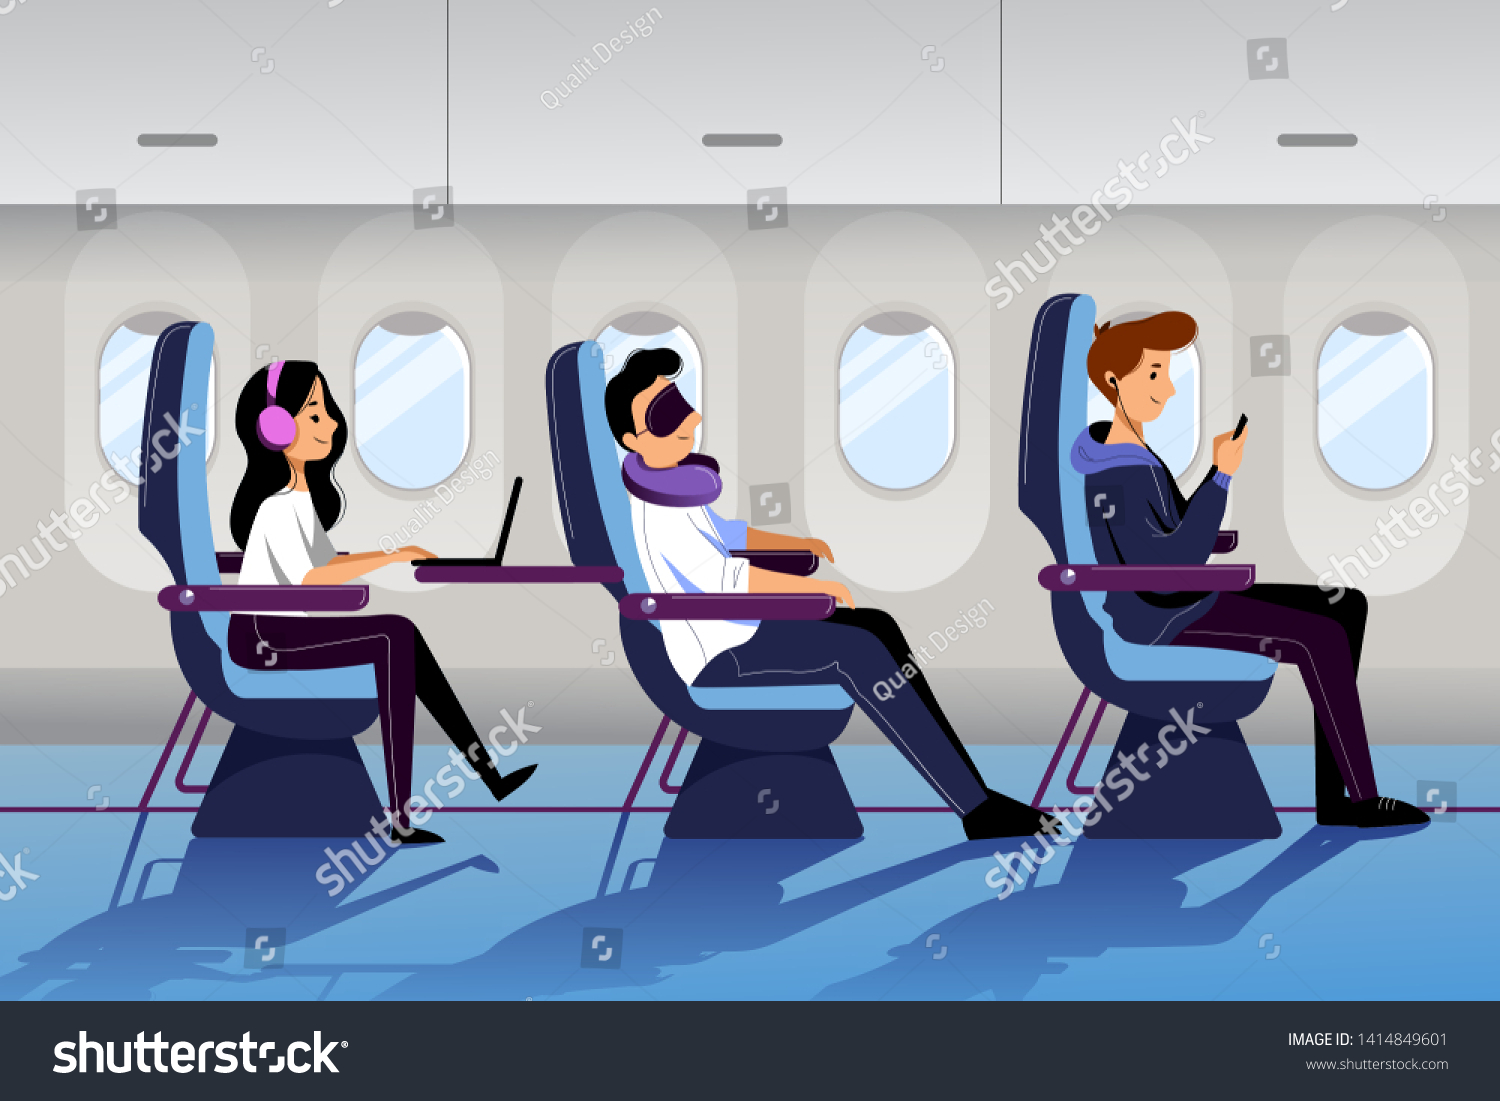 People travel by airplane in economy class. Plane interior with sleeping and working passengers. Vector flat cartoon illustration. #1414849601